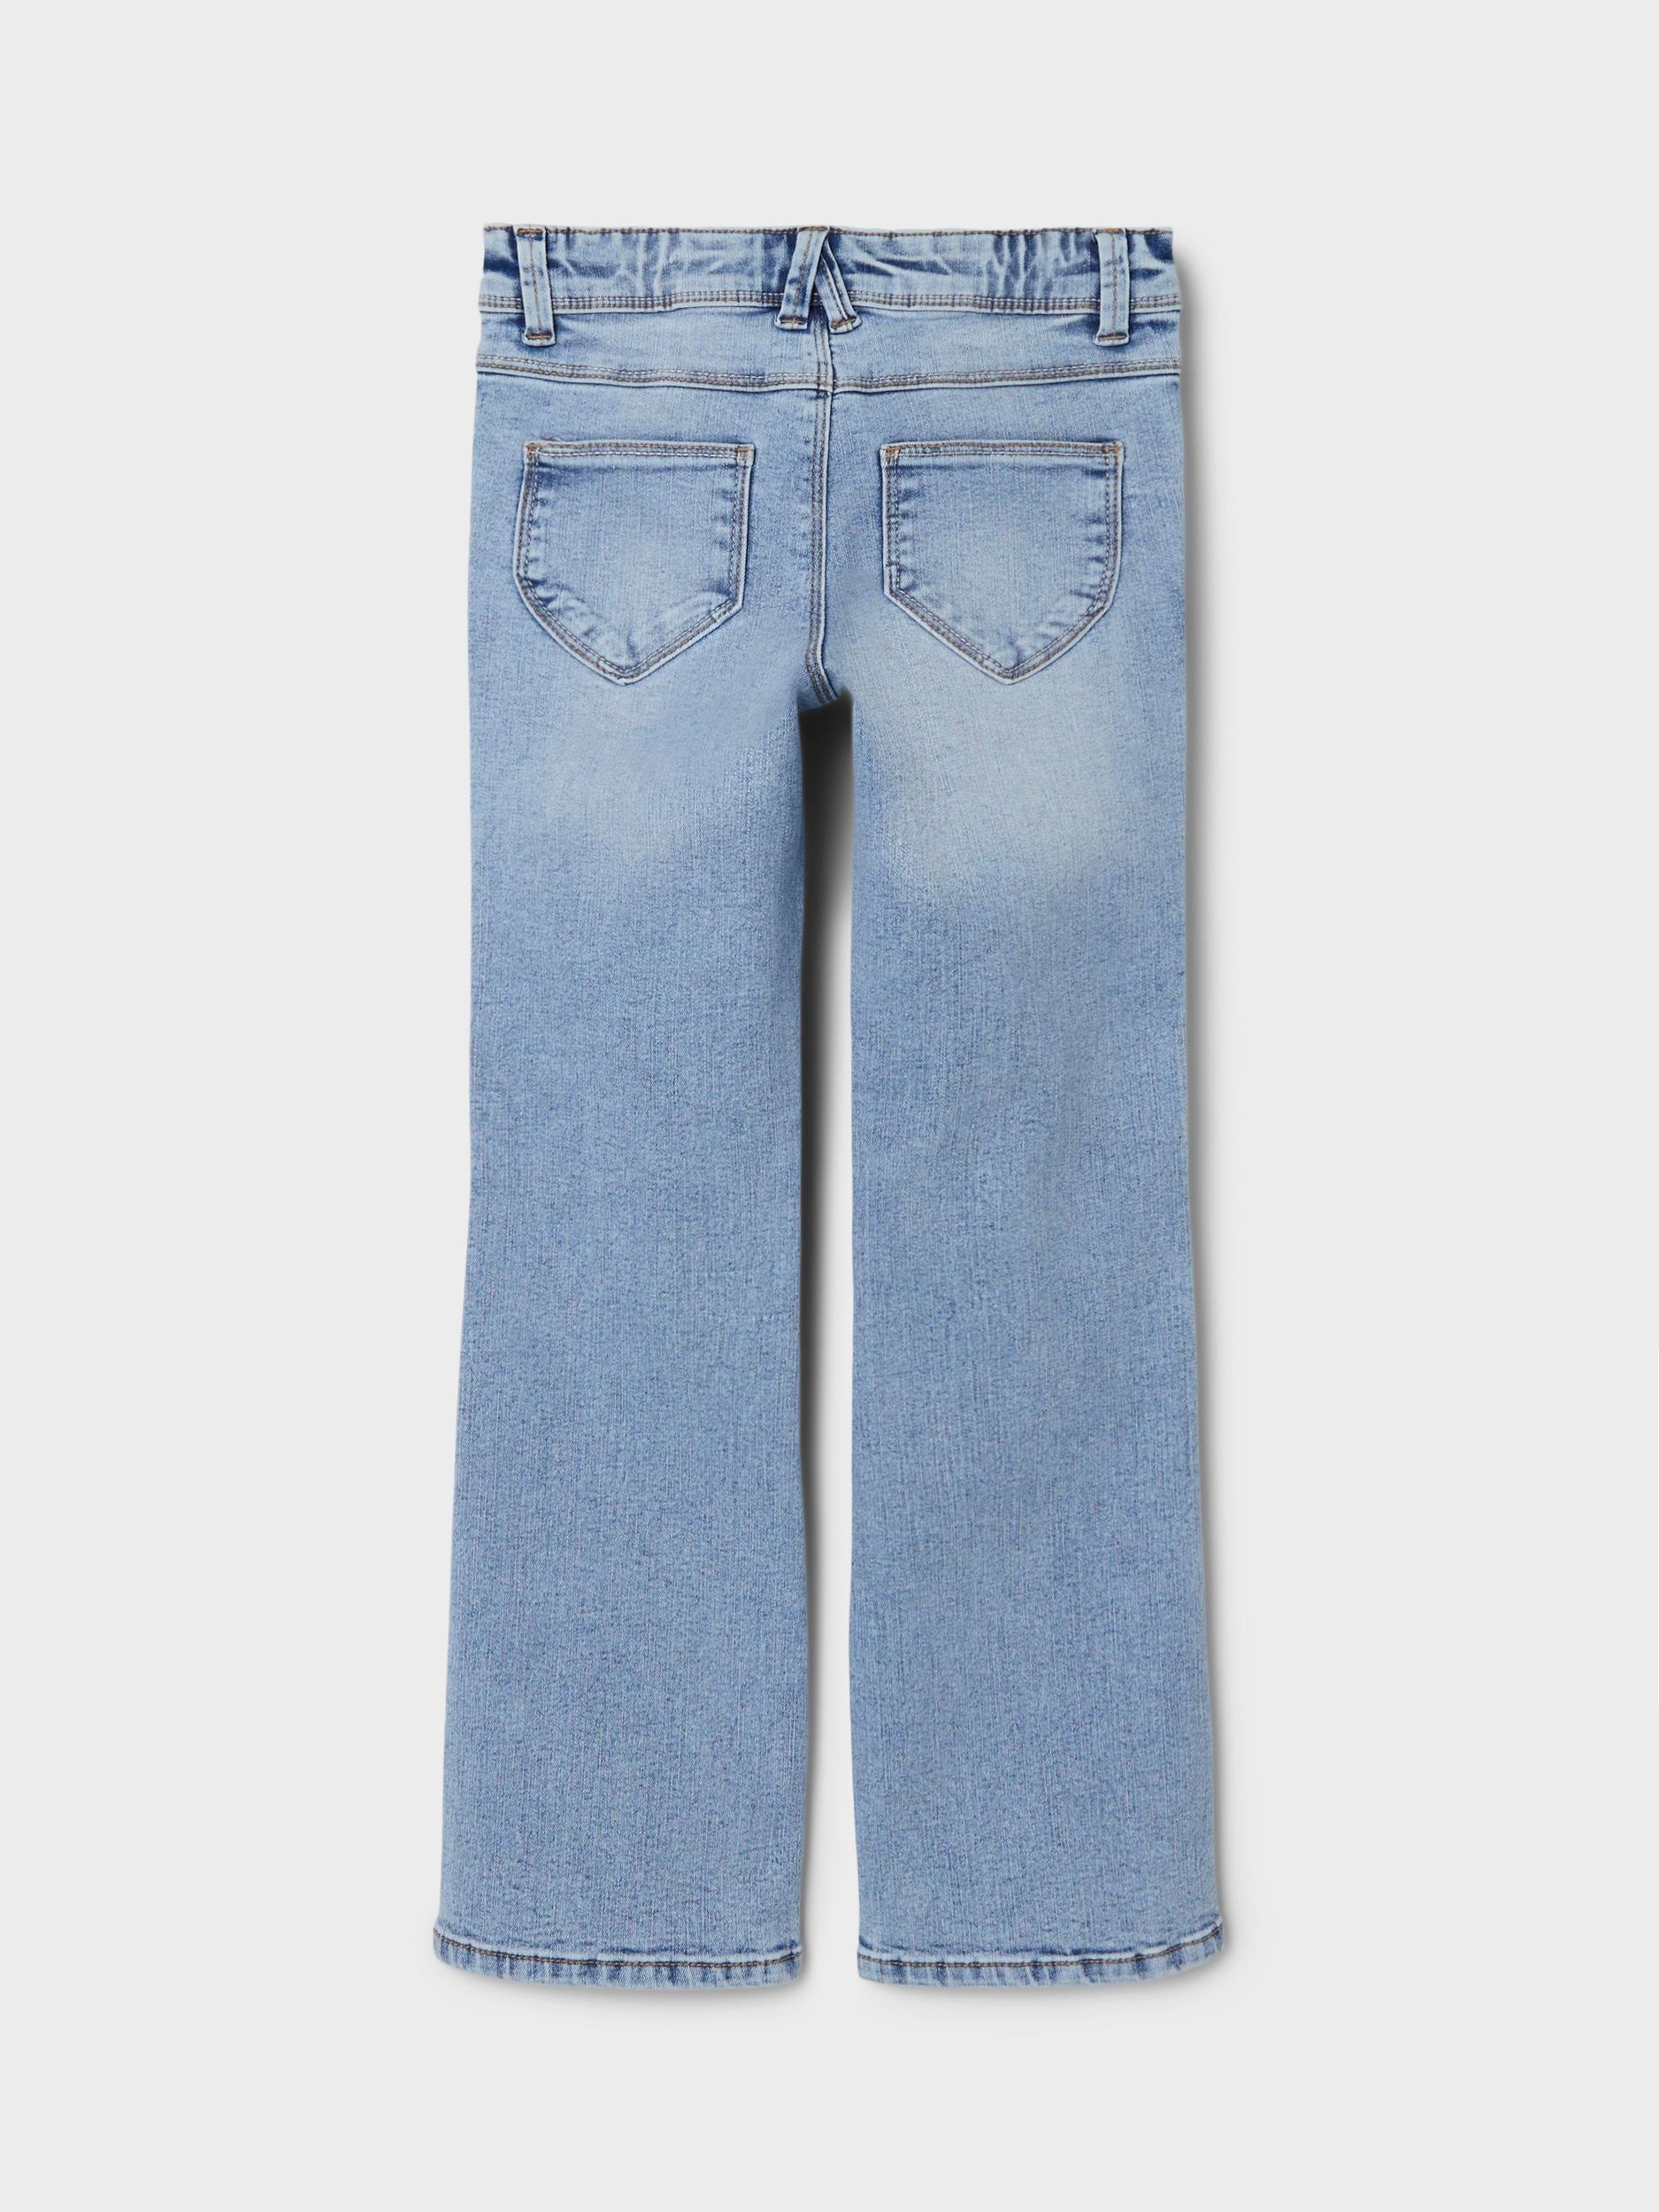 Name Bootcut-Jeans It SKINNY NOOS«, BOOT mit bei JEANS 1142-AU kaufen OTTO Stretch »NKFPOLLY